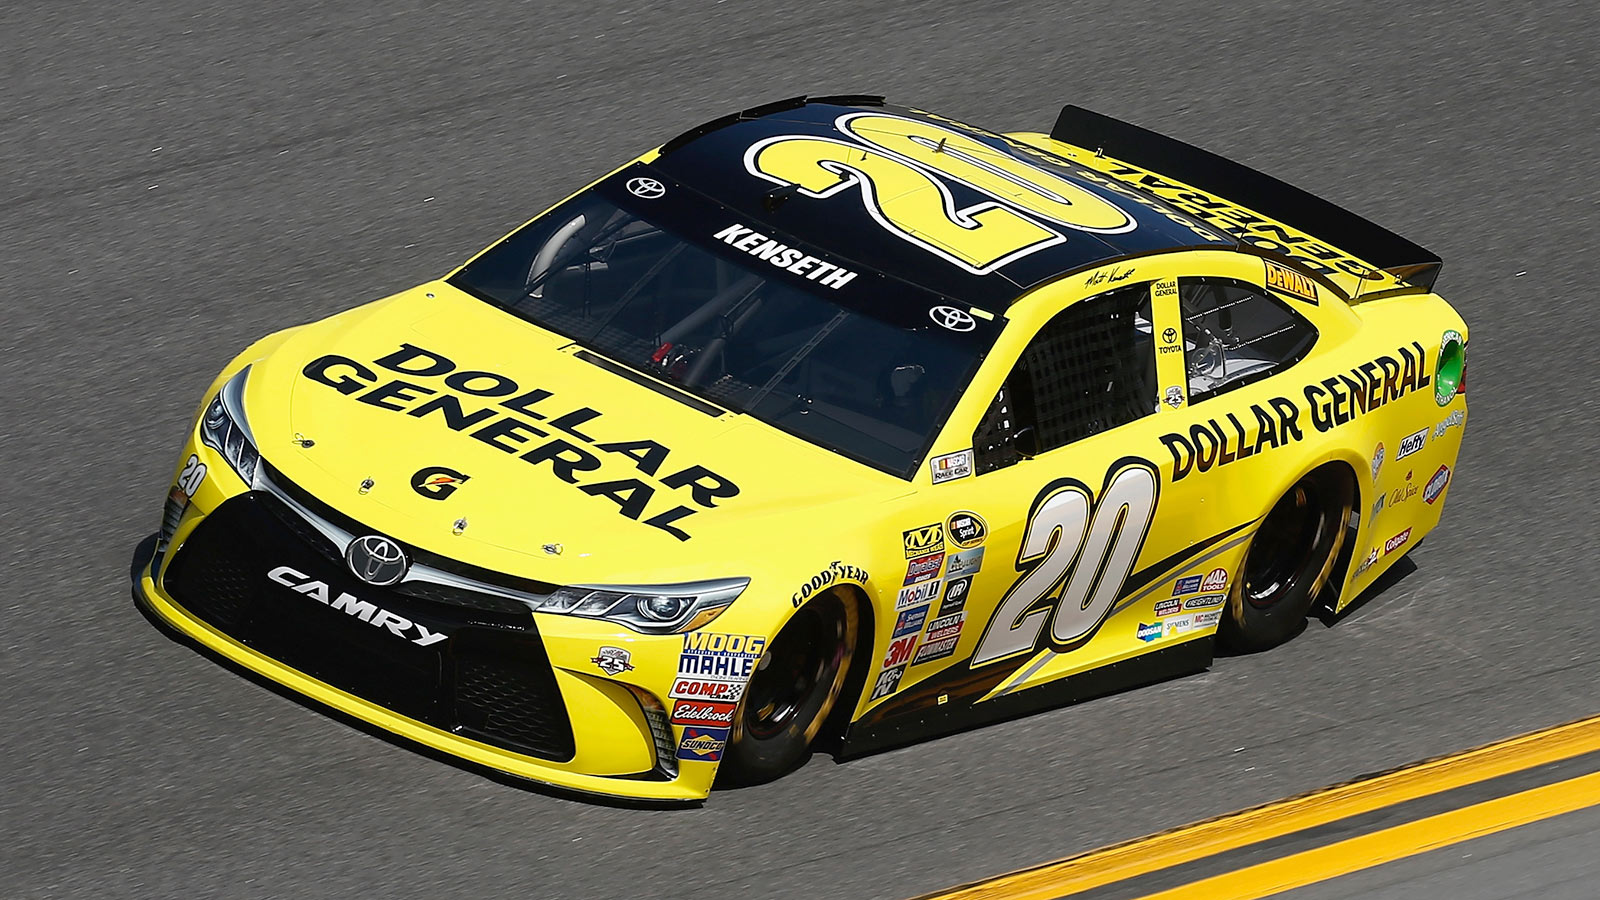 Starting lineups for Can-Am Duel races set for Daytona